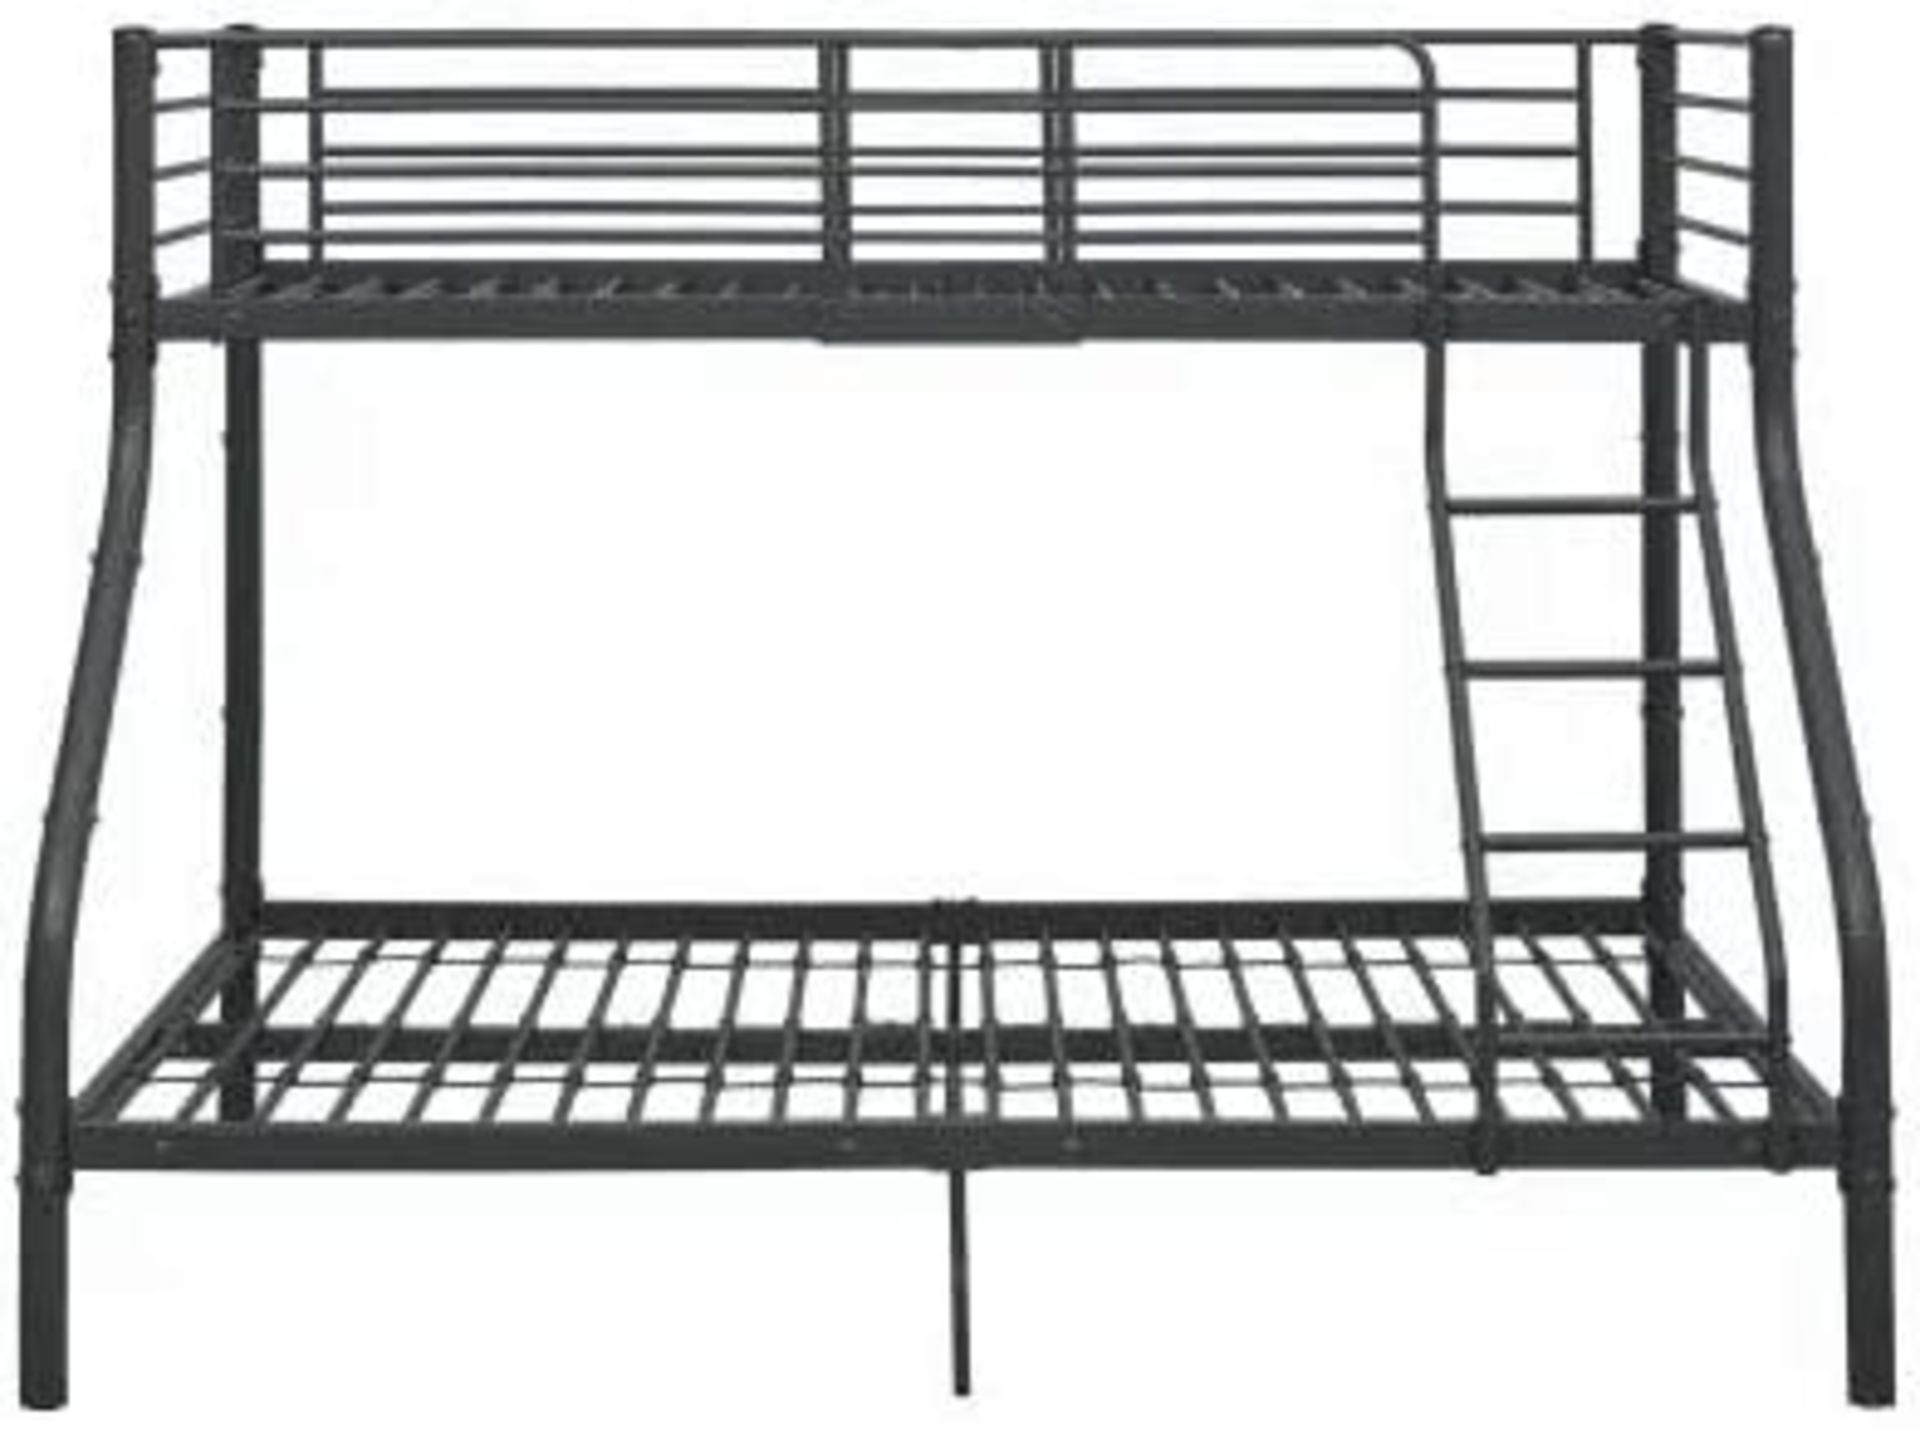 Black triple sleeper tubular bunk bed frame- collection only, has been dismantled